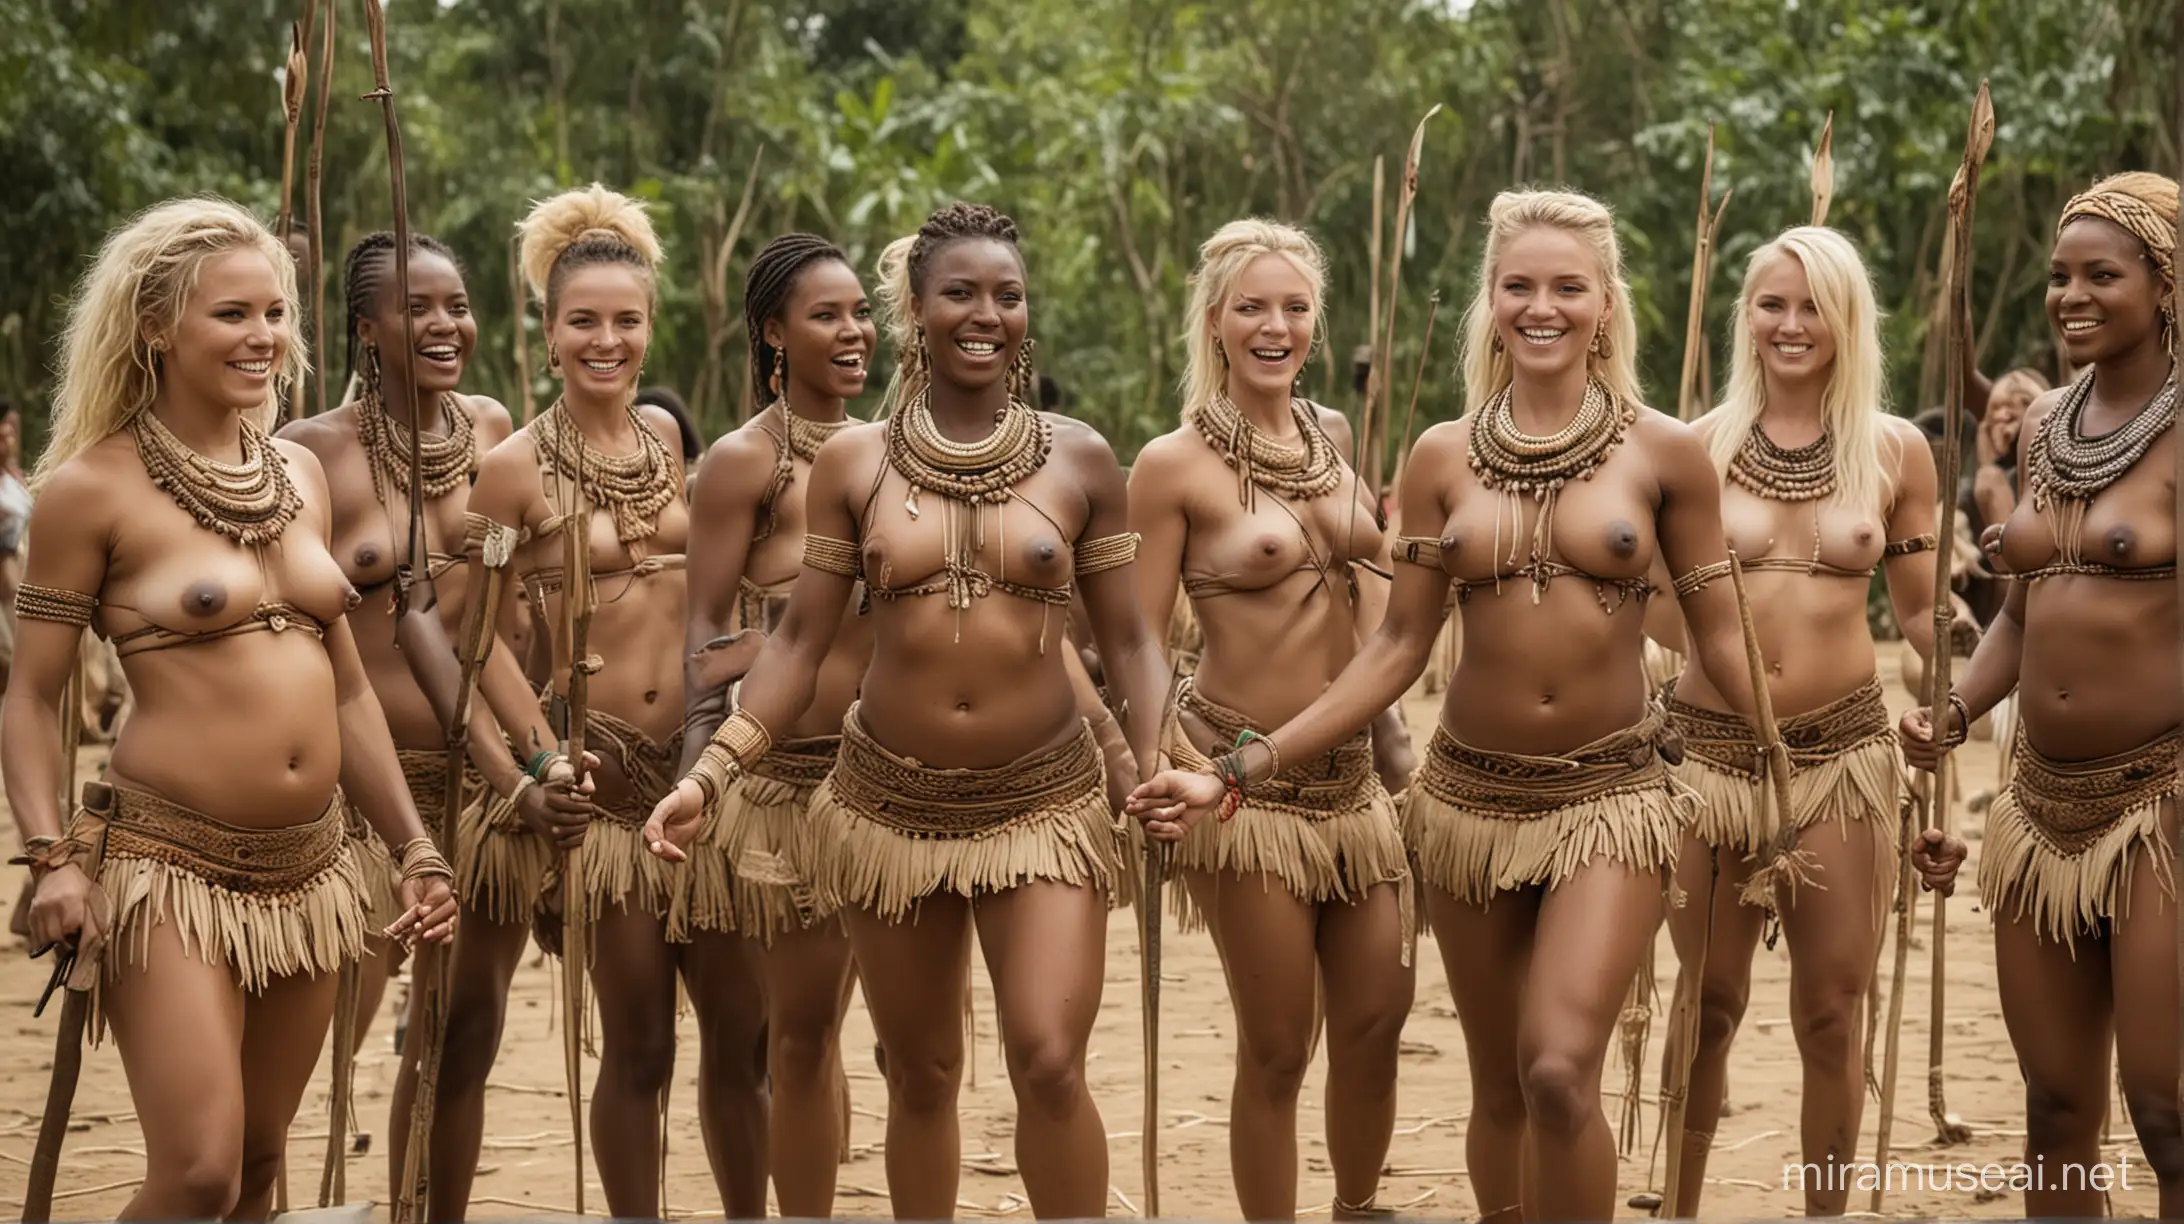 Hot African women with stuffed belly, and hot blonde Amazon women participating in a tribe ritual, they have spears and are smiling 